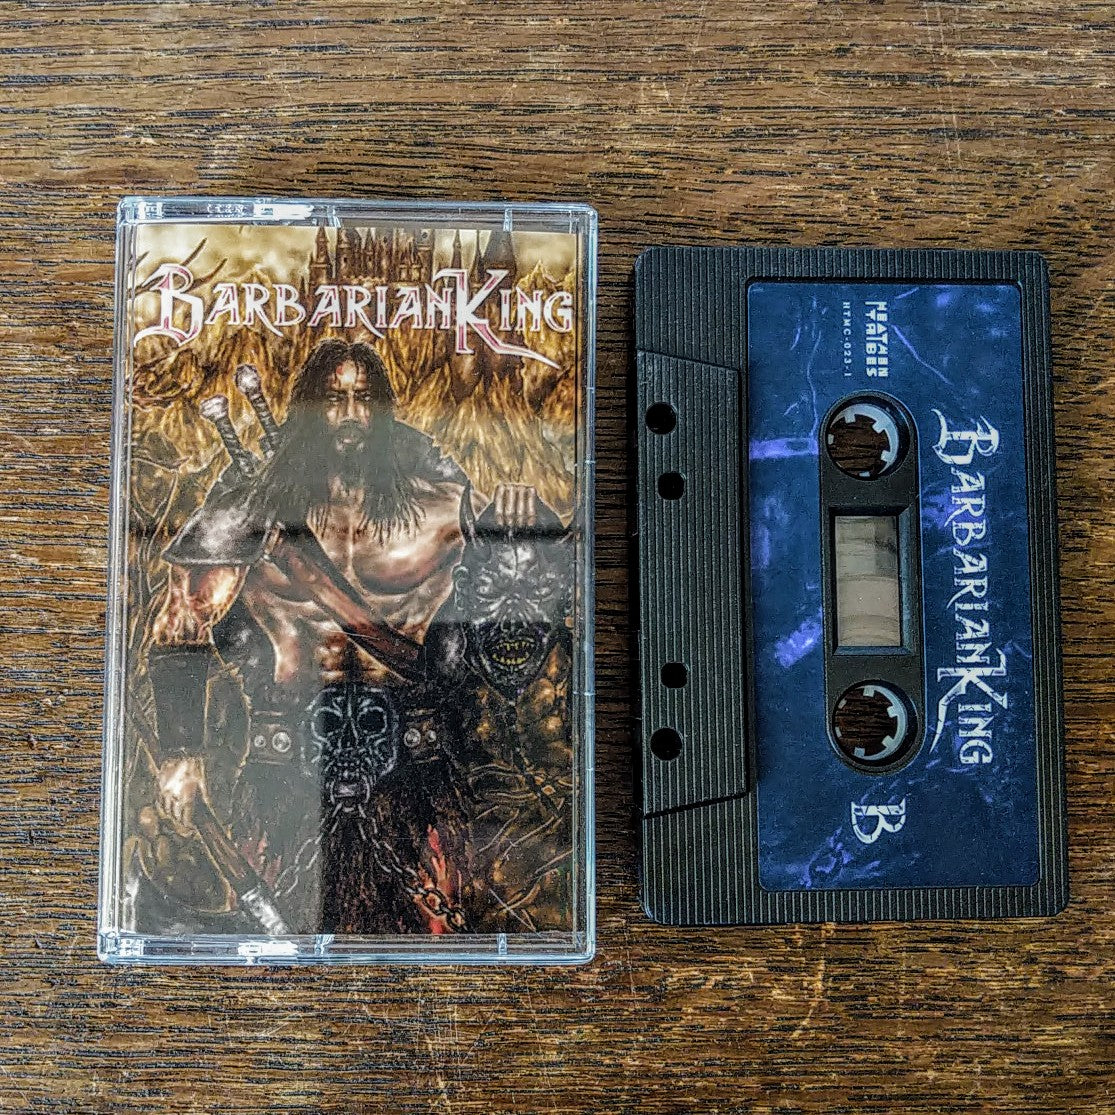 [SOLD OUT] BARBARIAN KING "Barbarian King" Cassette Tape